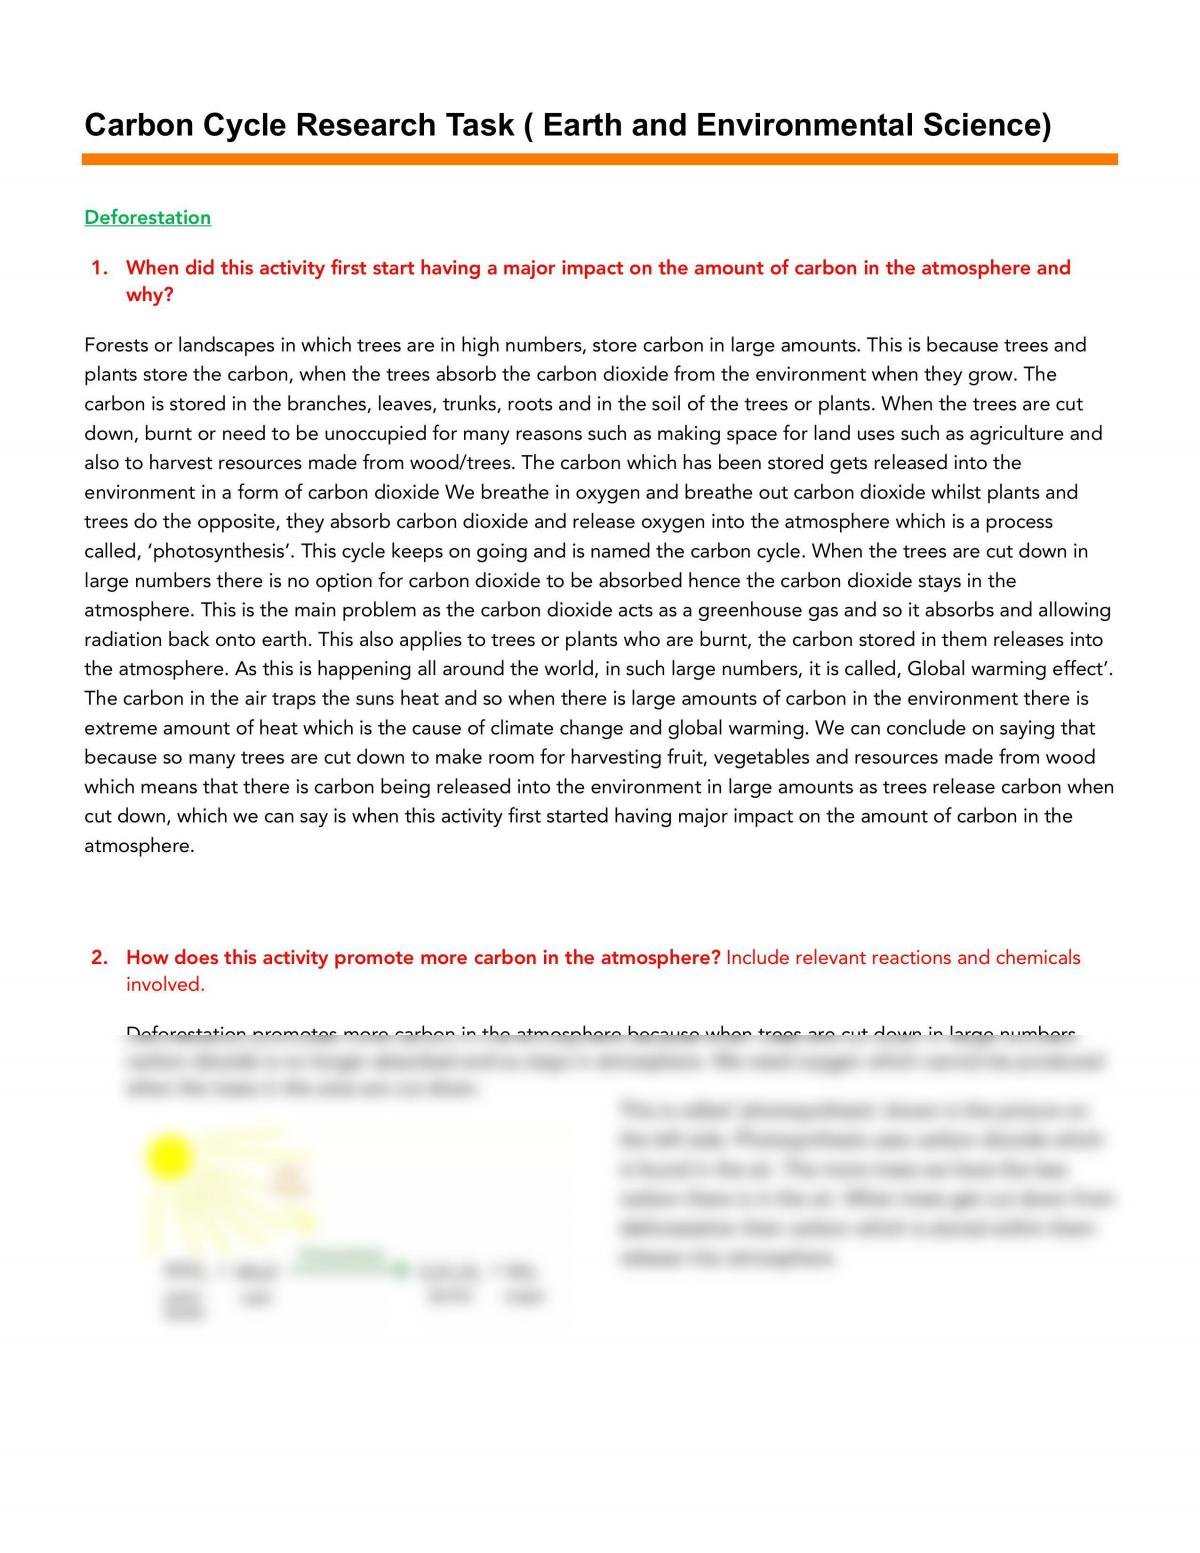 Carbon Cycle Research Task  - Page 1